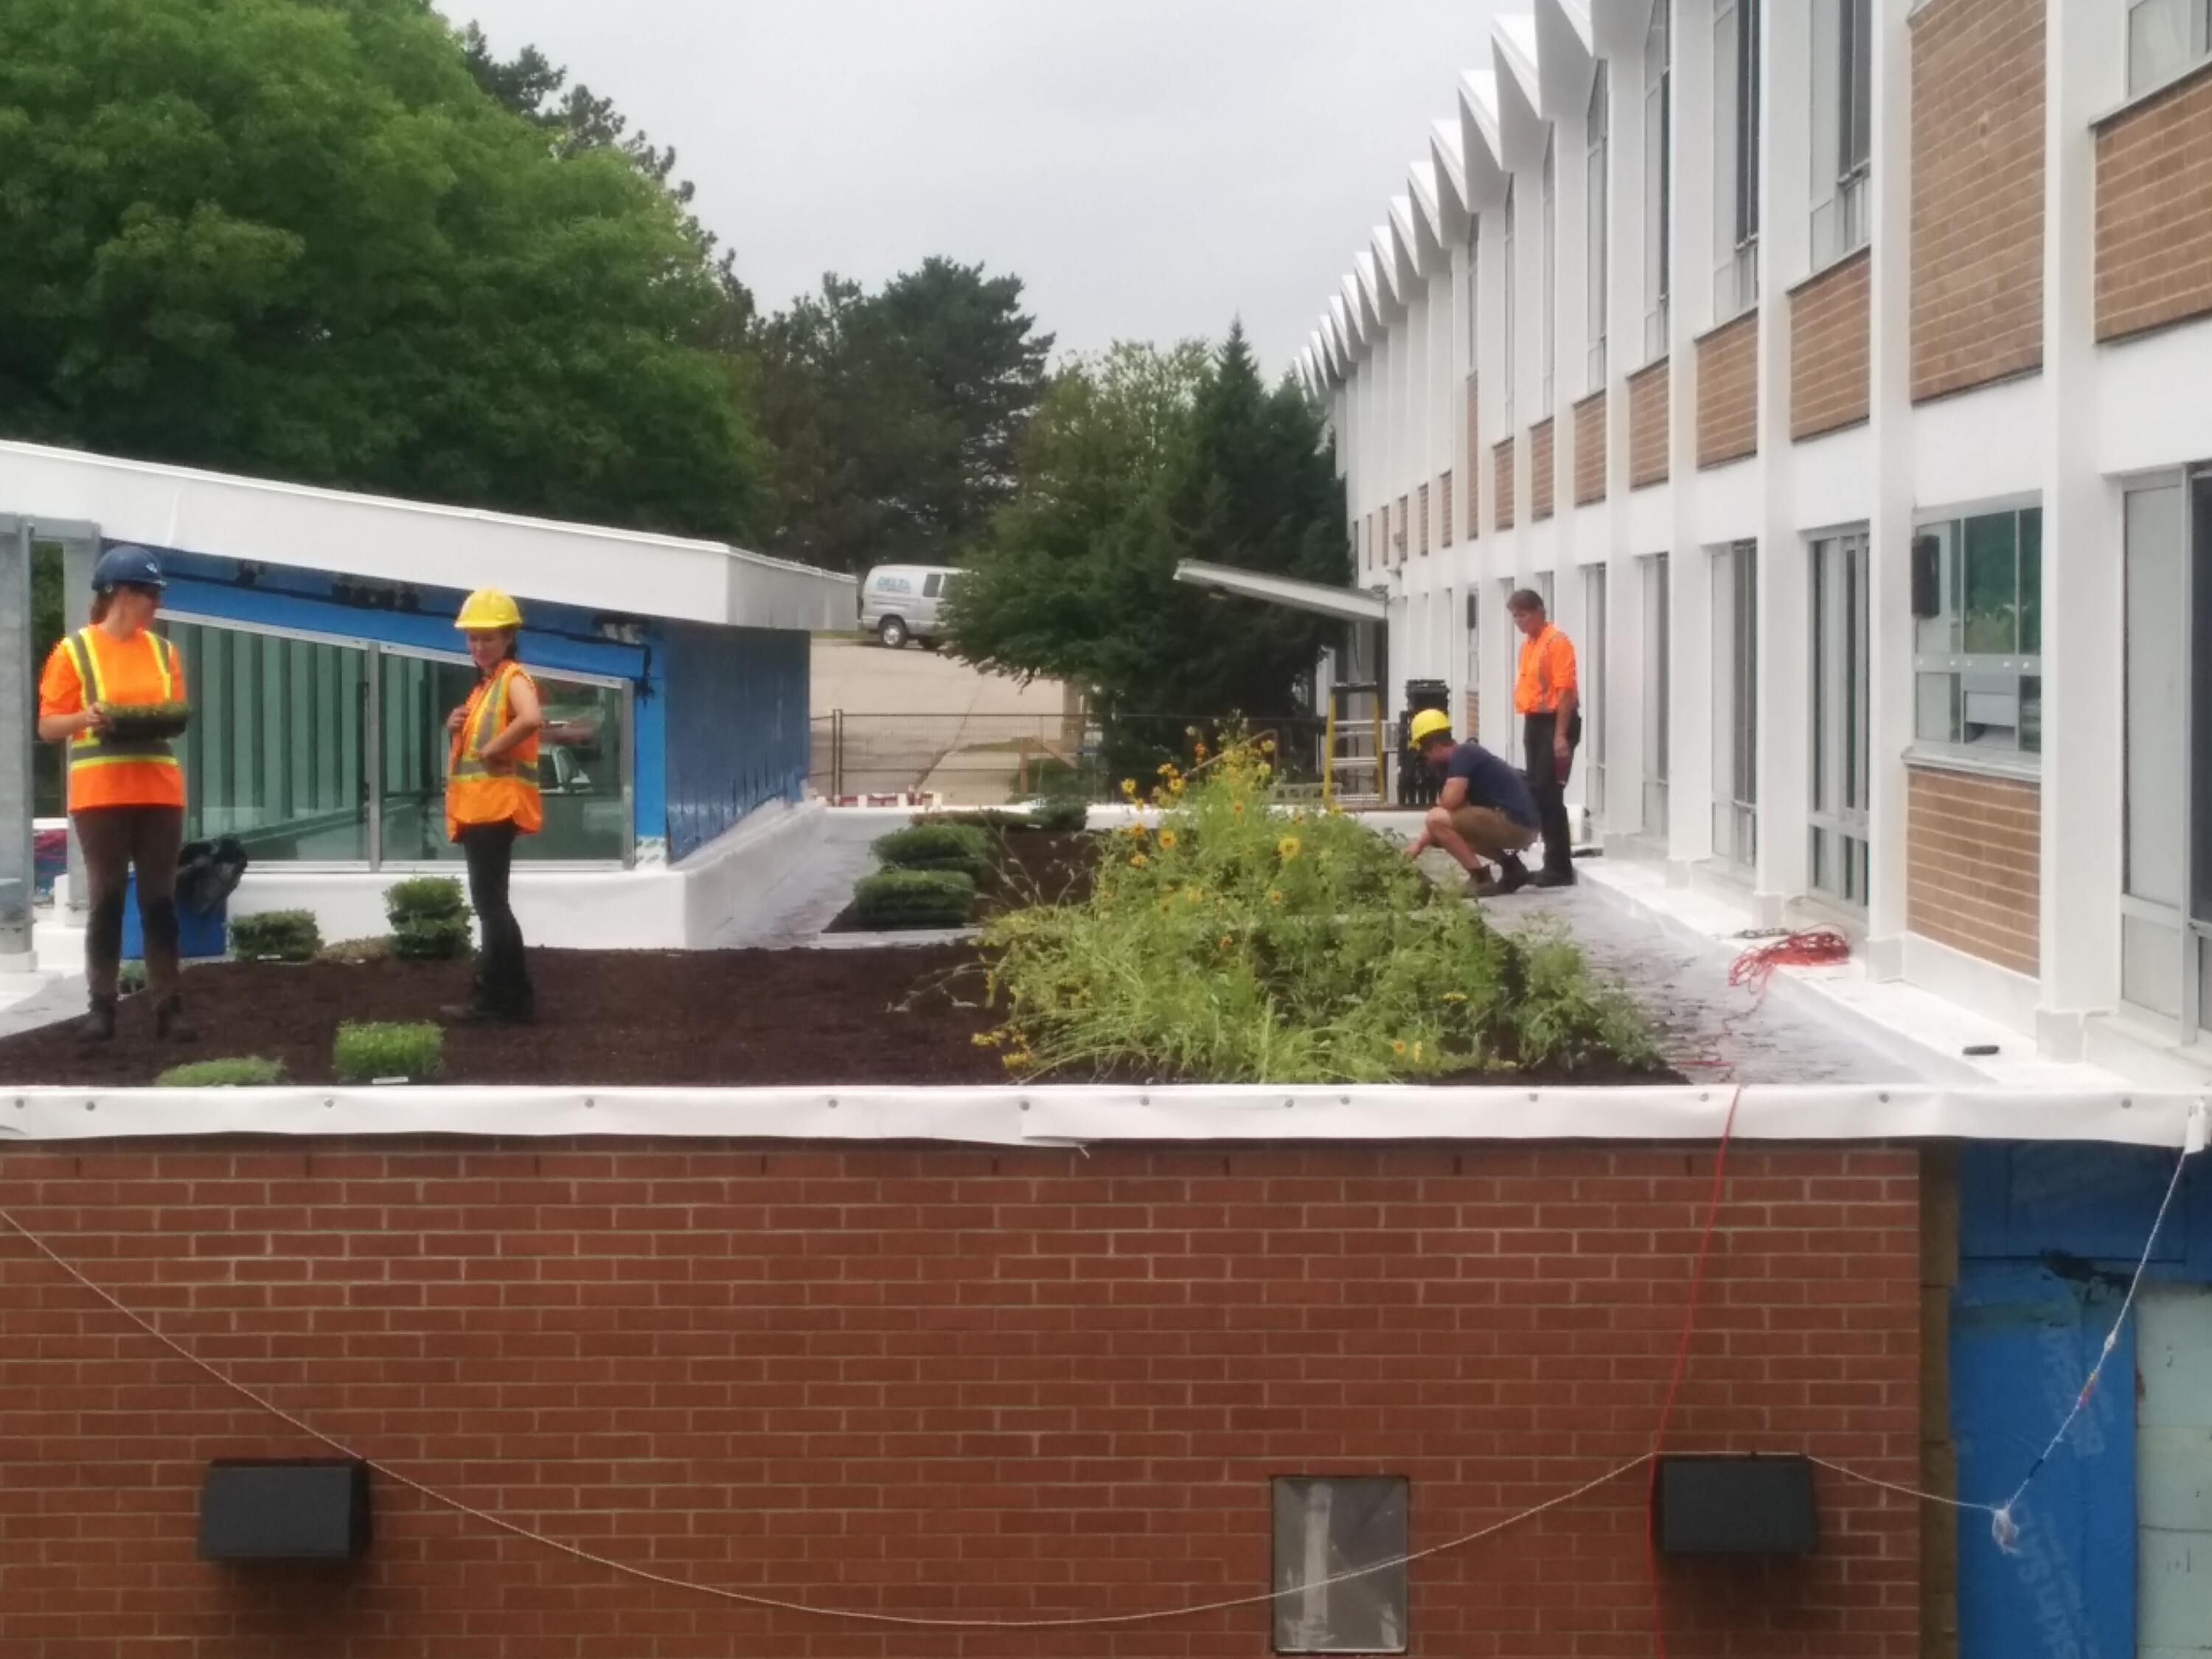 Workers plant a meadow garden on the rooftop of the new kitchen